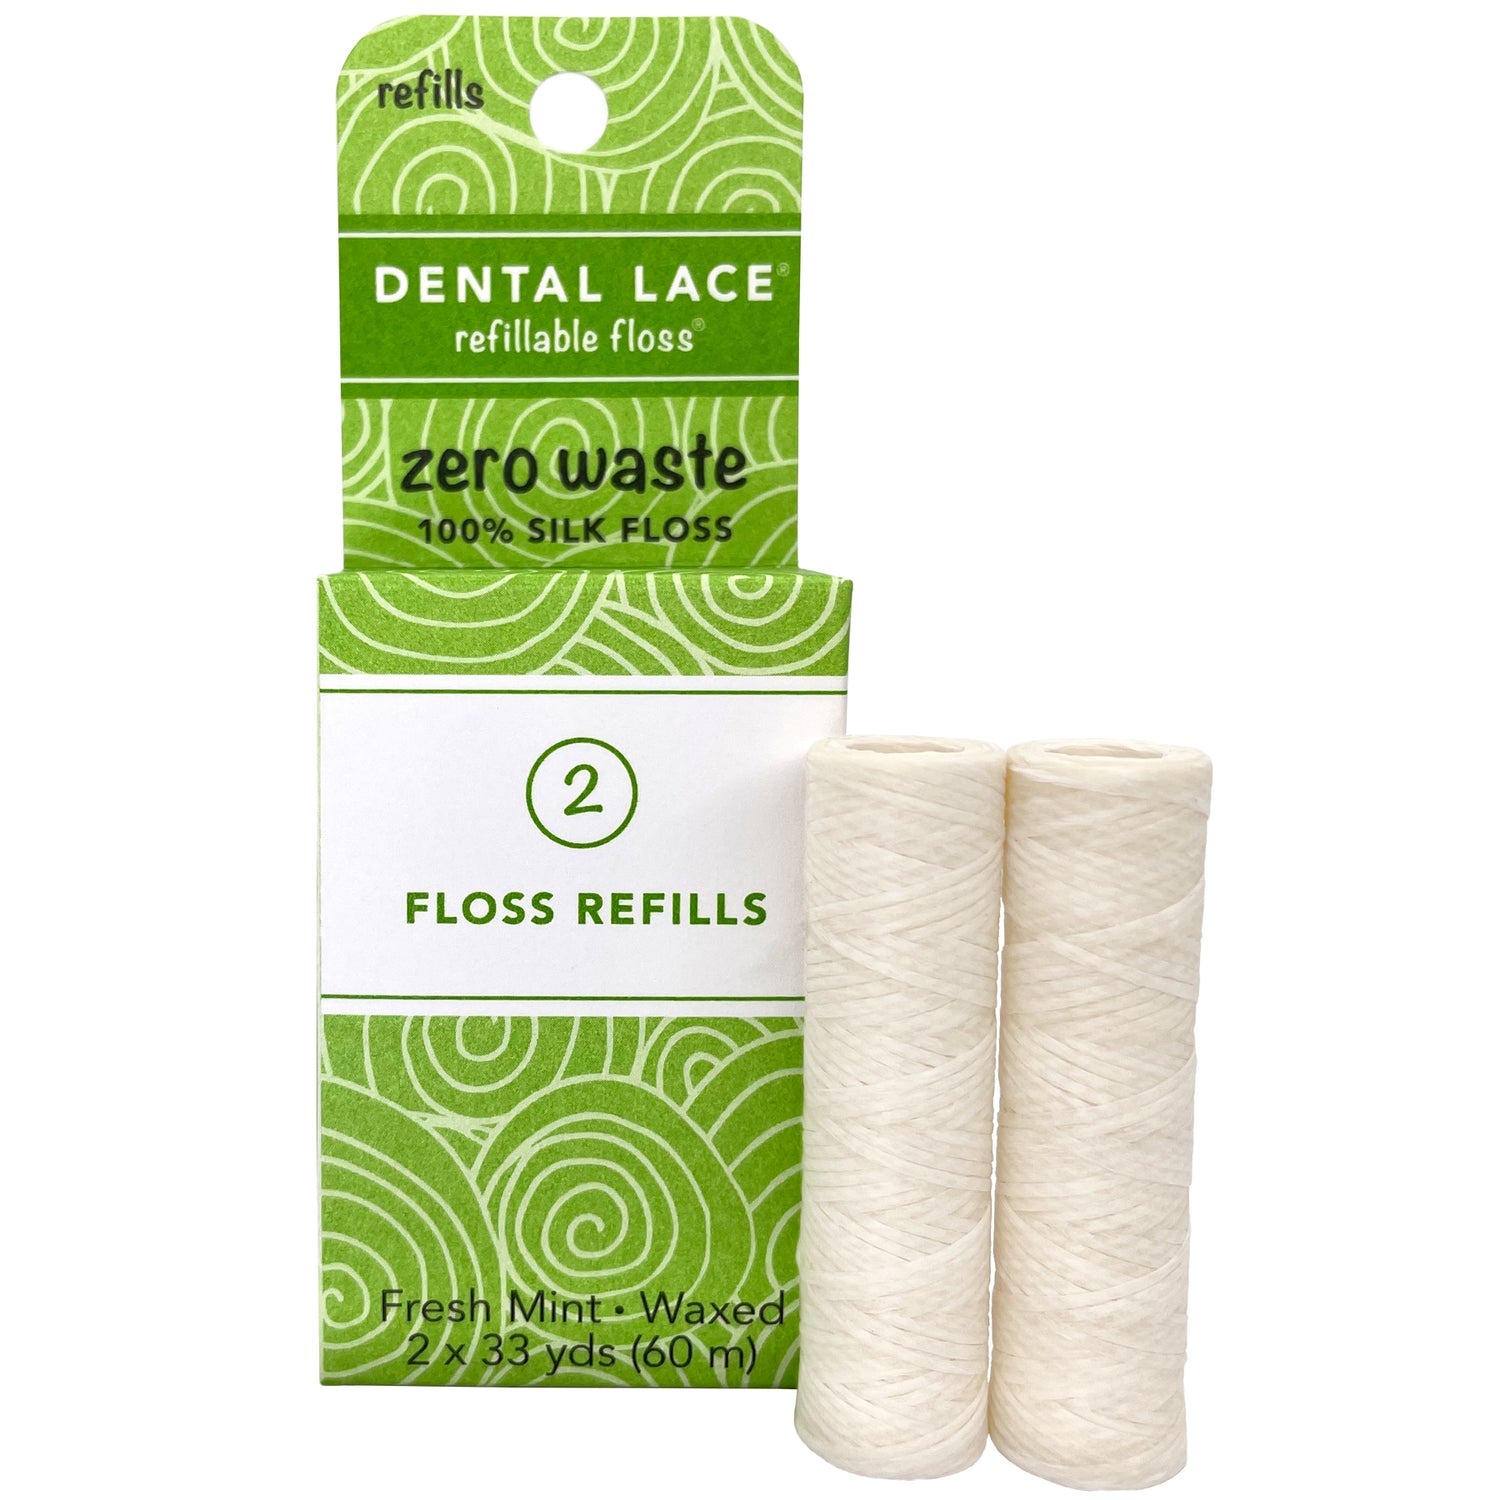 Lace Refills | Waste Floss Refills